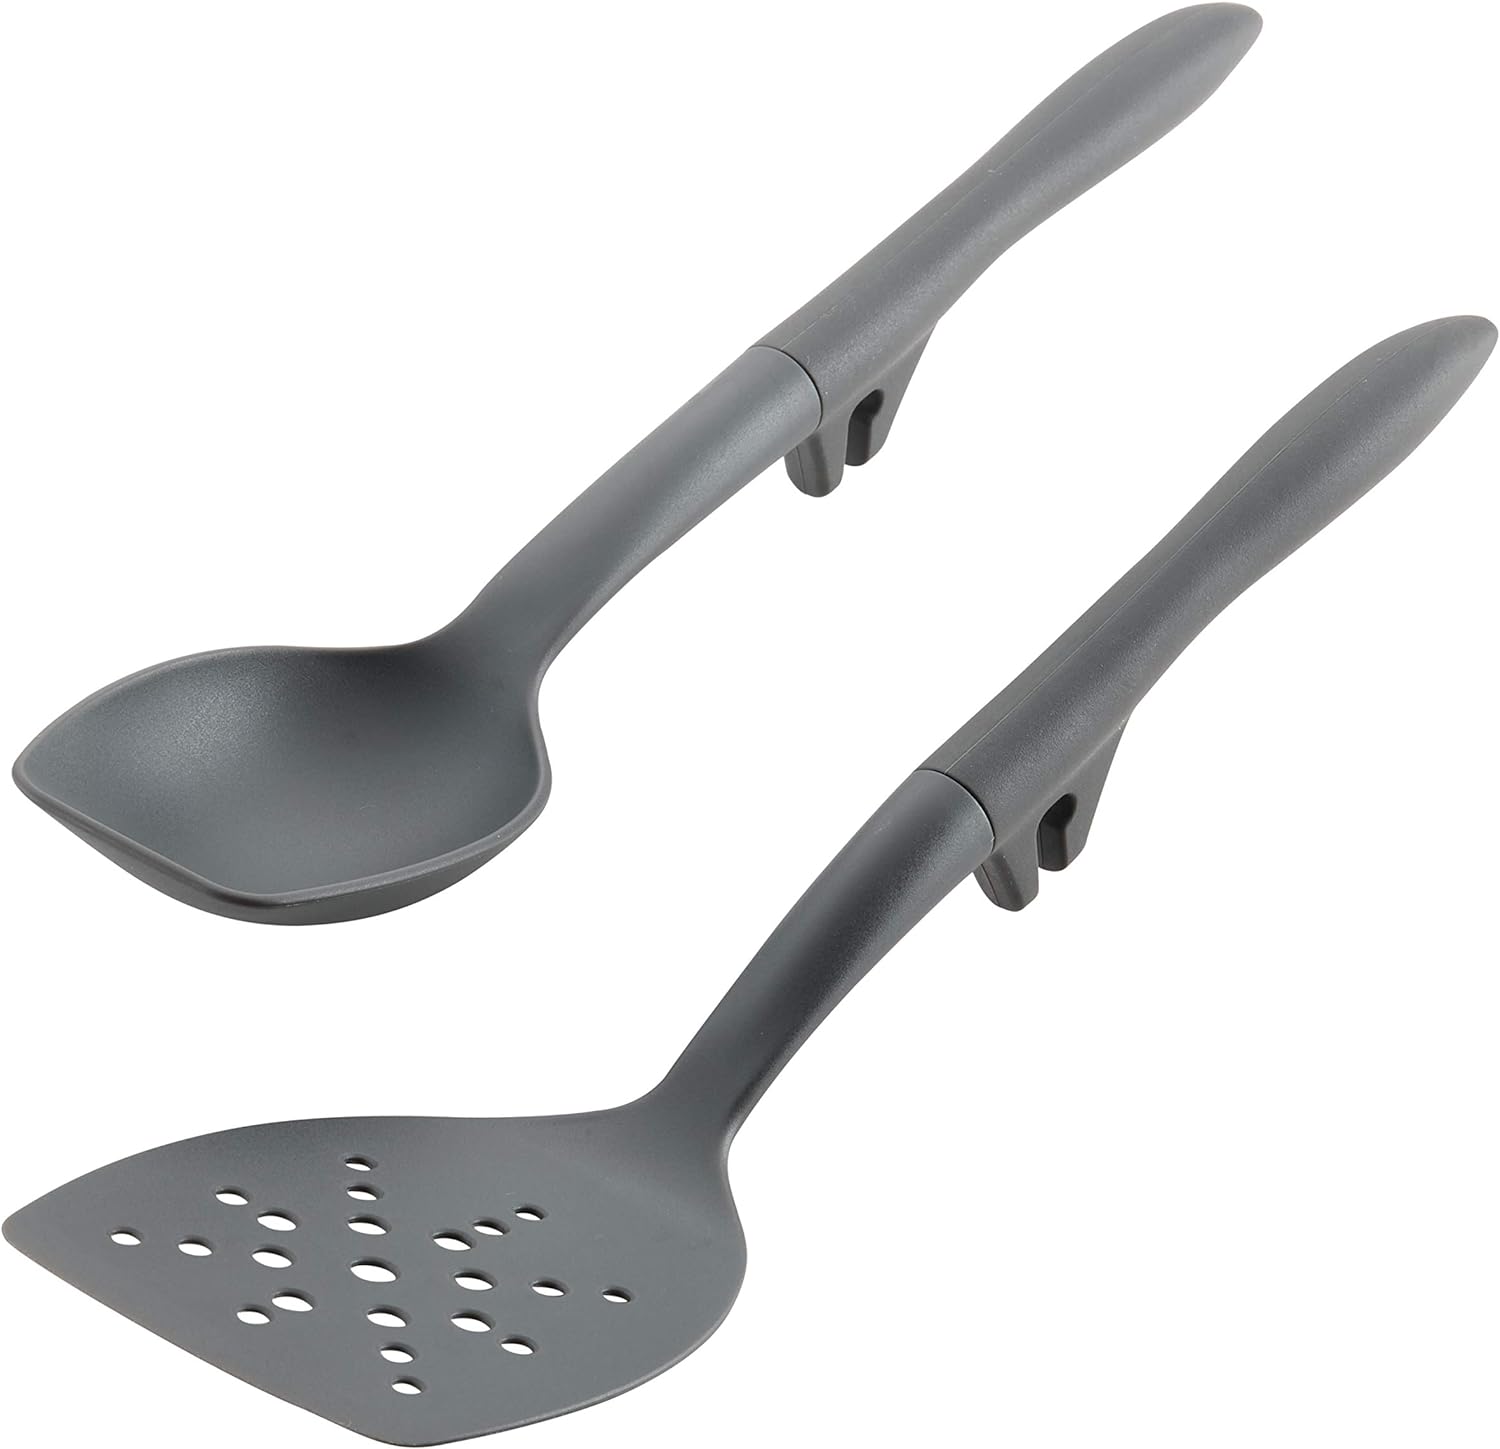 Rachael Ray Tools and Gadgets Flexi Turner and Scraping Spoon Set / Cooking Utensils – 2 Piece, Gray